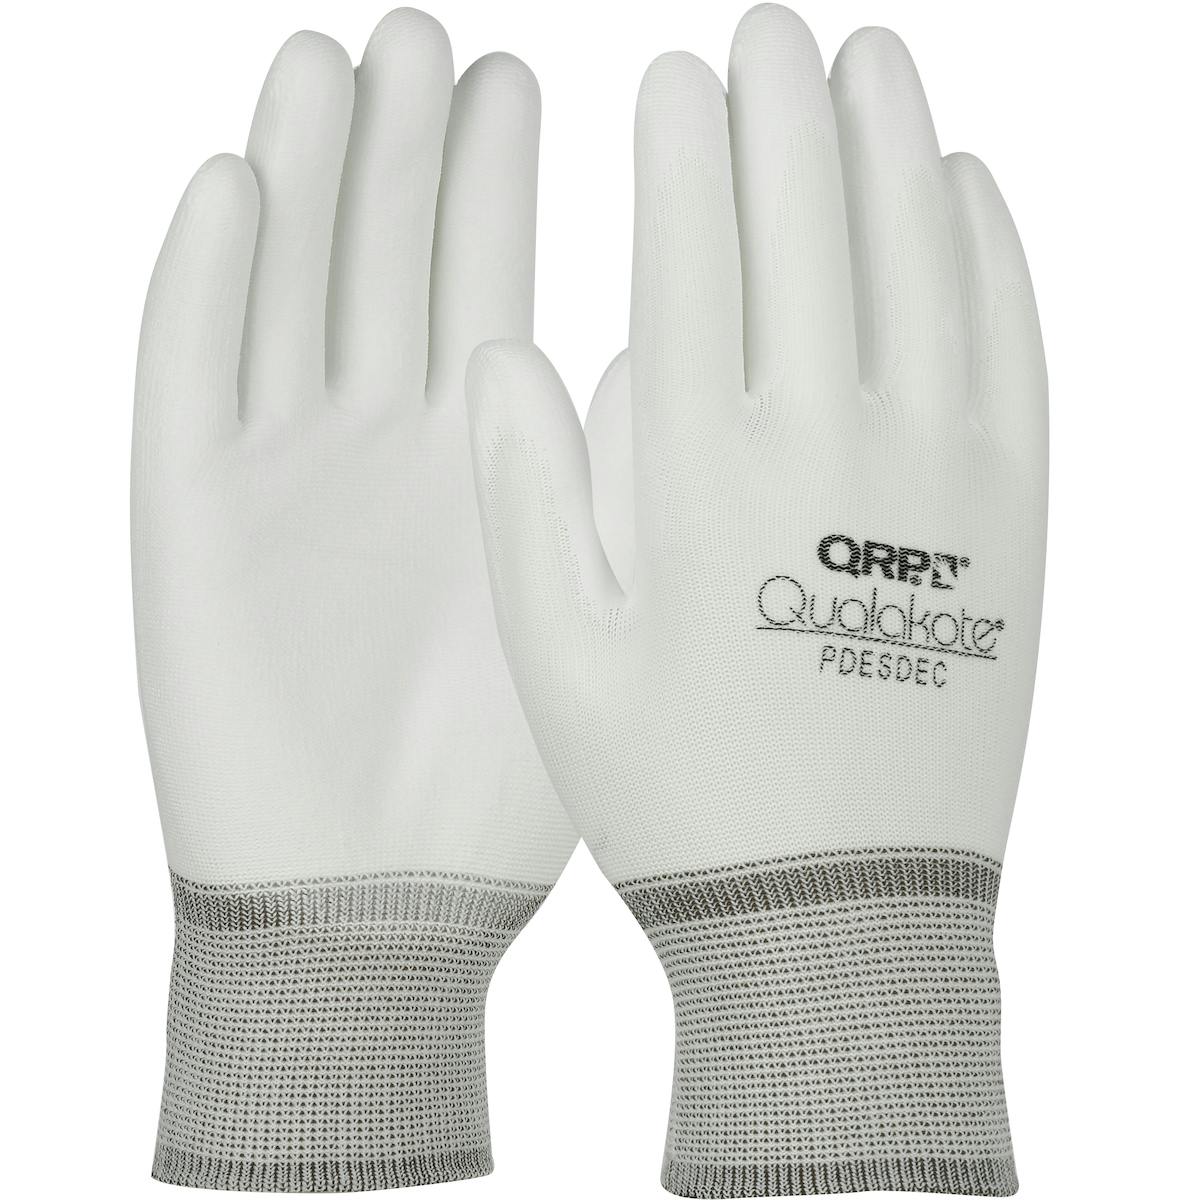 QRP® Qualakote® Seamless Knit Nylon Glove with Polyurethane Coated Microfoam Grip on Palm & Fingertips (PDESDEC)